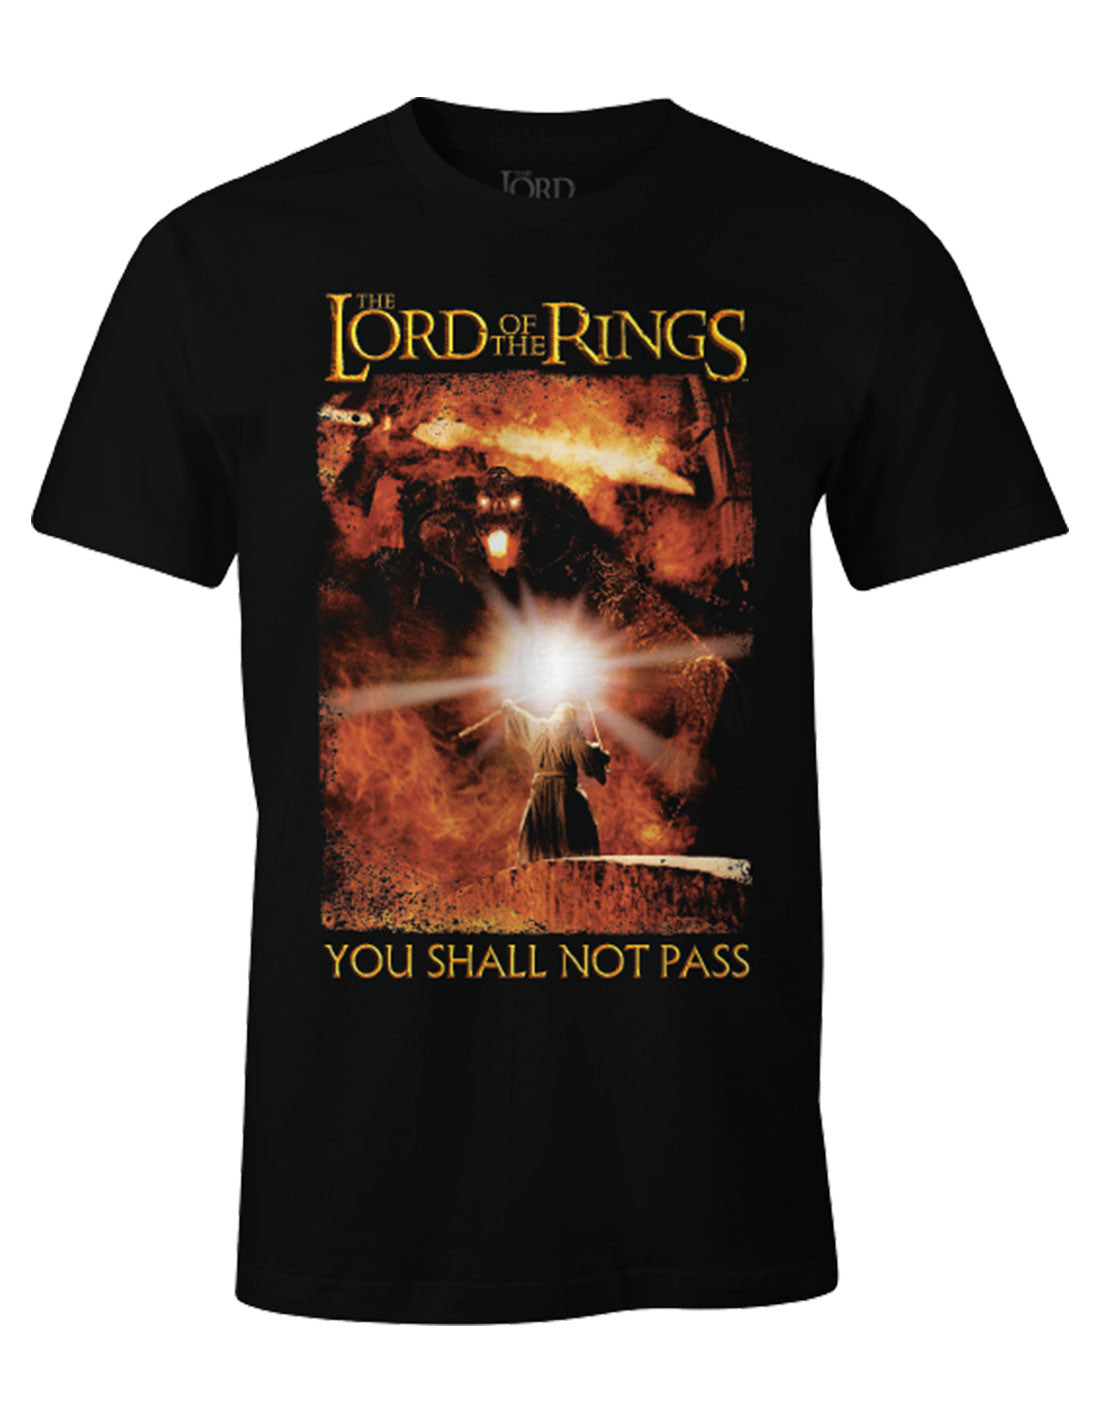 The Lord of the Rings T-Shirt - You Shall Not Pass